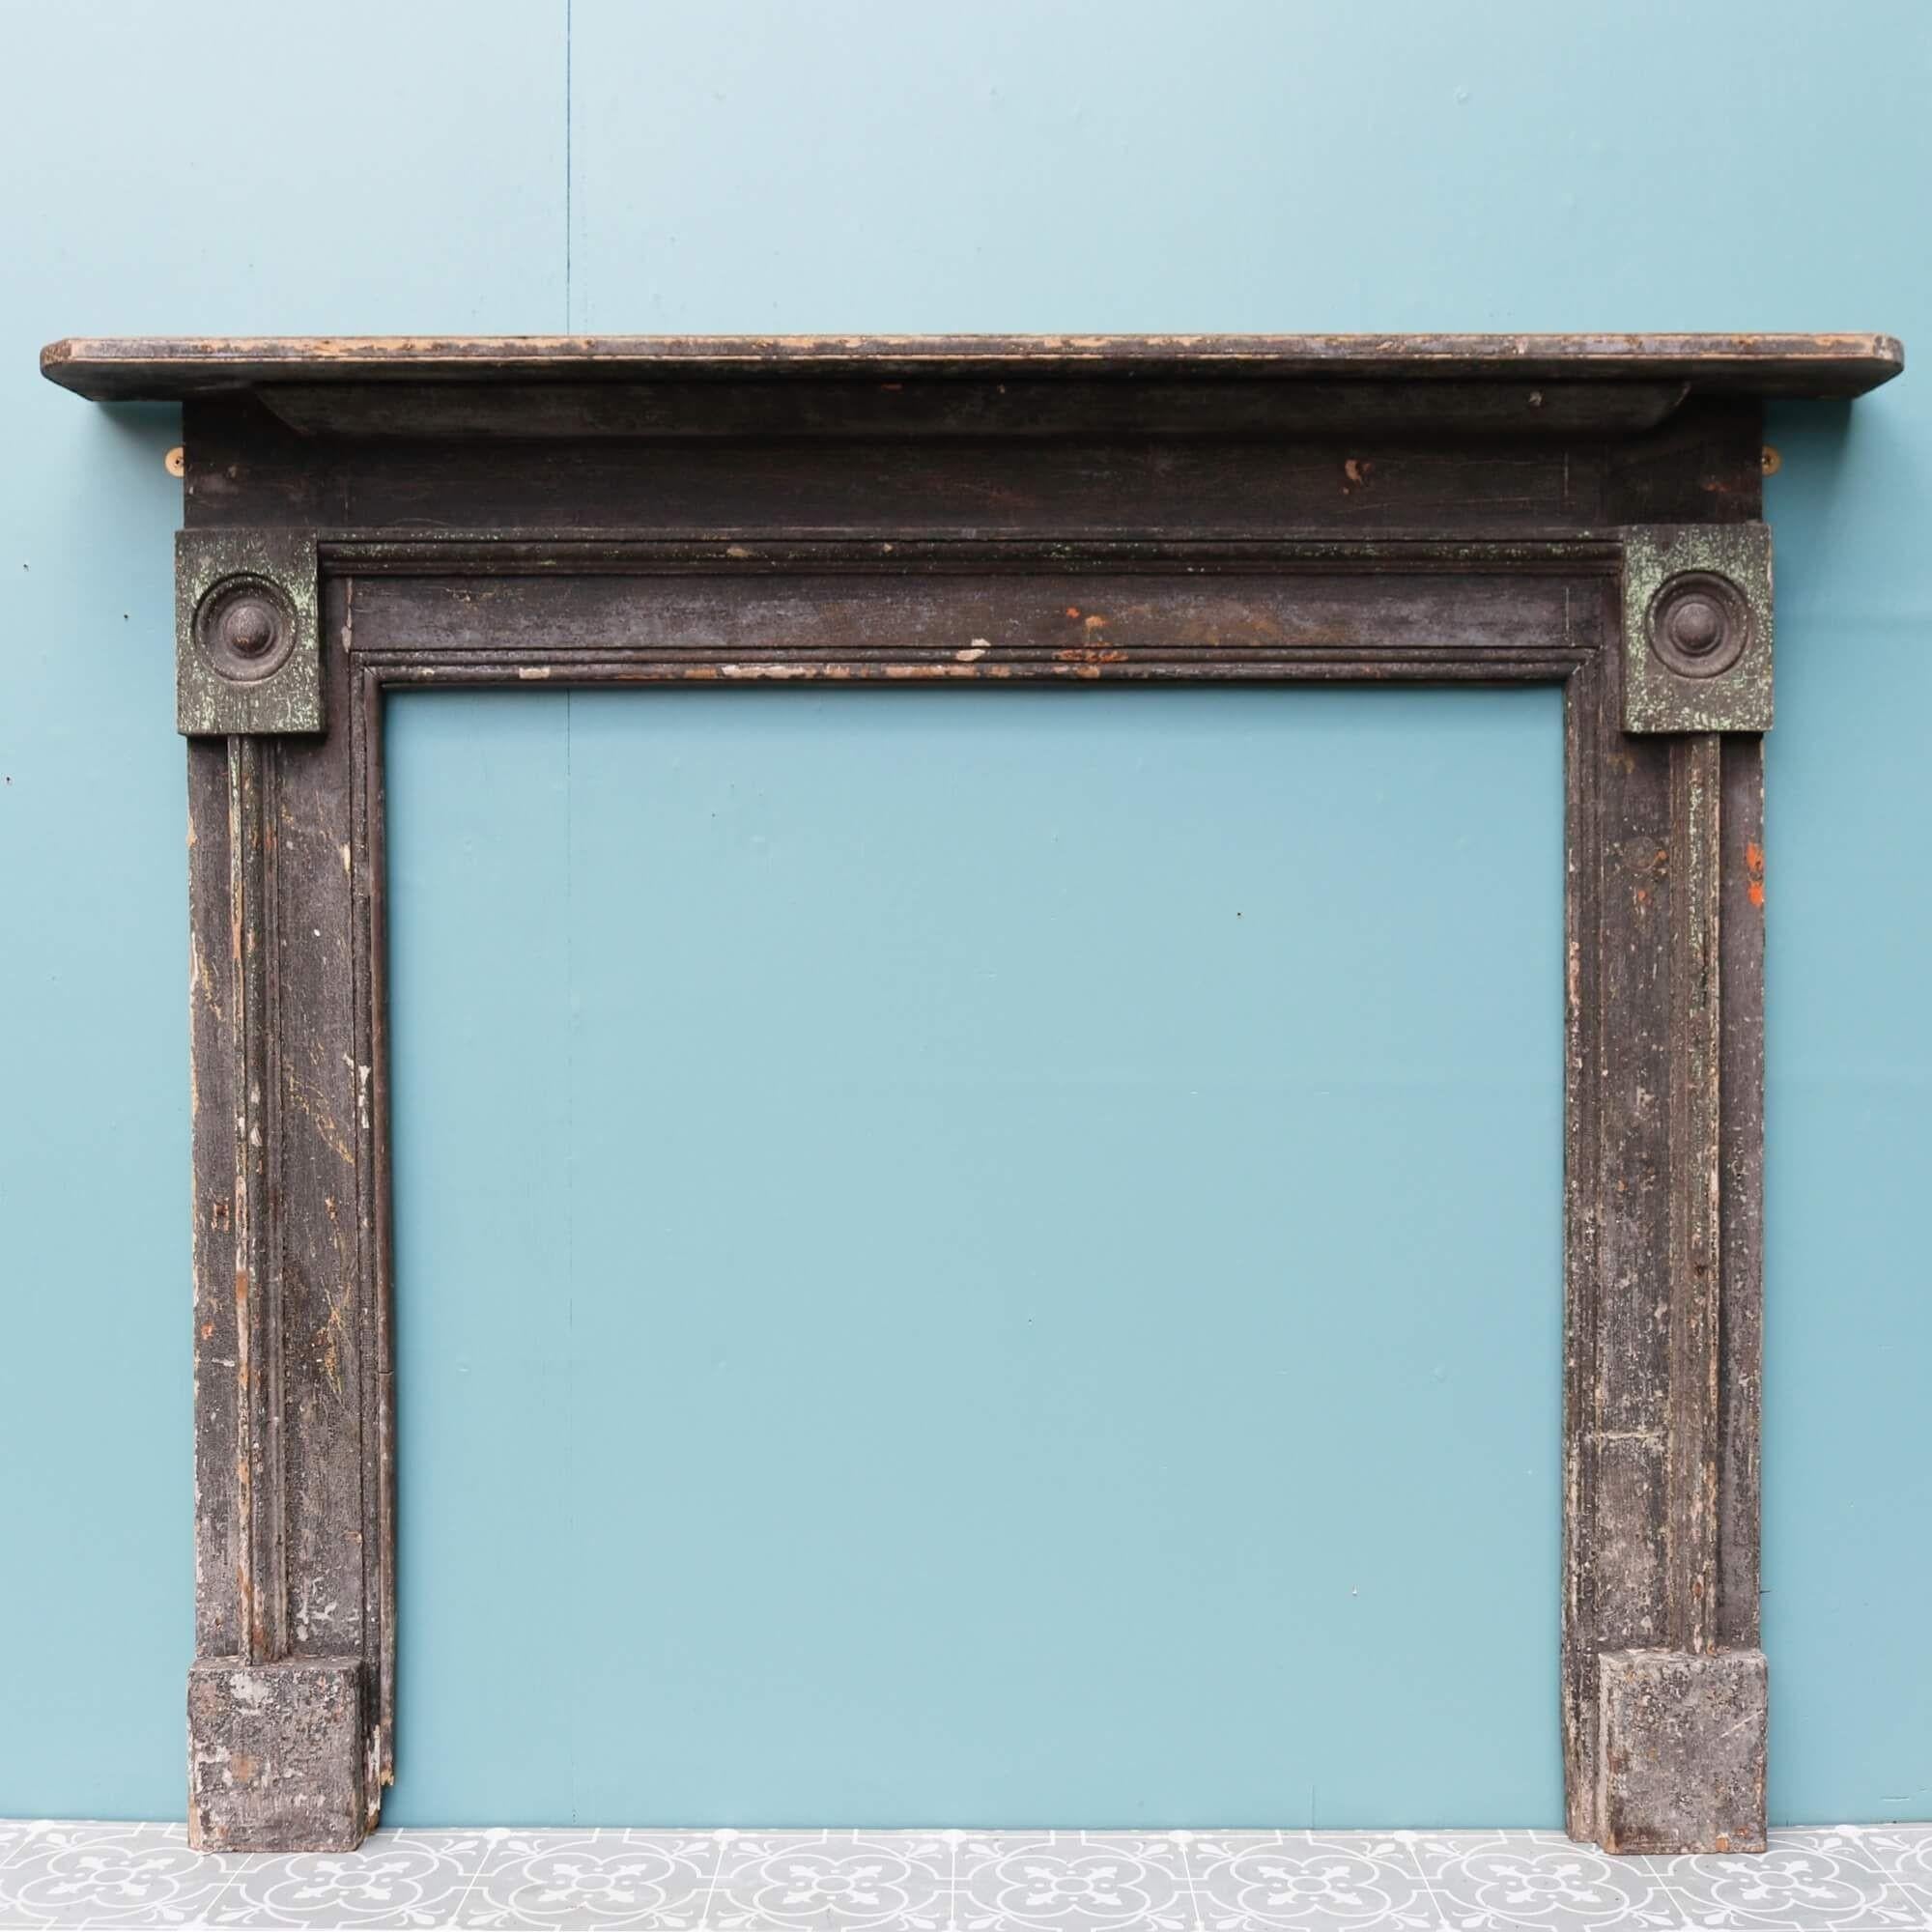 Salvaged from a Norfolk farmhouse, this original 18th century bullseye fireplace is a timepiece from history. It is made in pine with several layers of old paint which has worn beautifully throughout the decades to give a wonderfully distressed